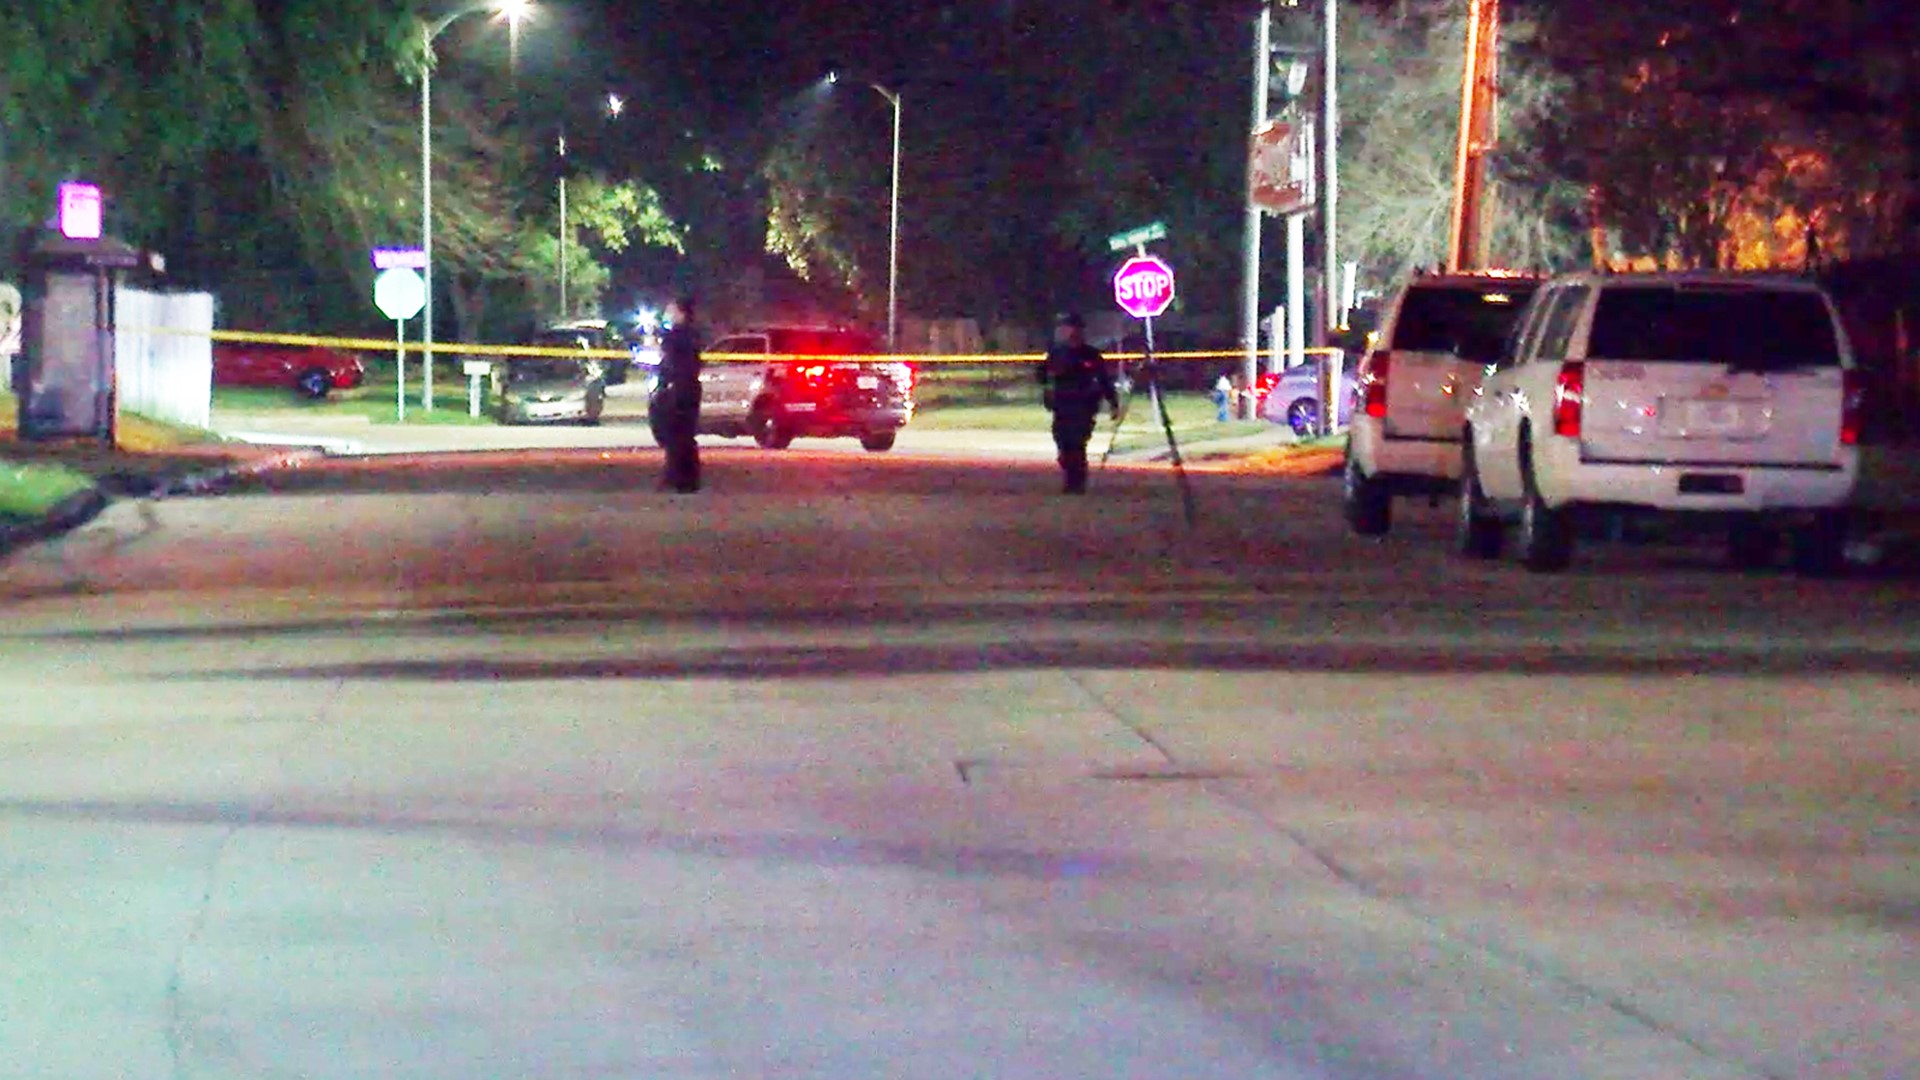 Houston police said two teenagers were shot late Sunday while waiting at a bus stop on the southwest side. The shooting was reported at about 10:25 p.m.